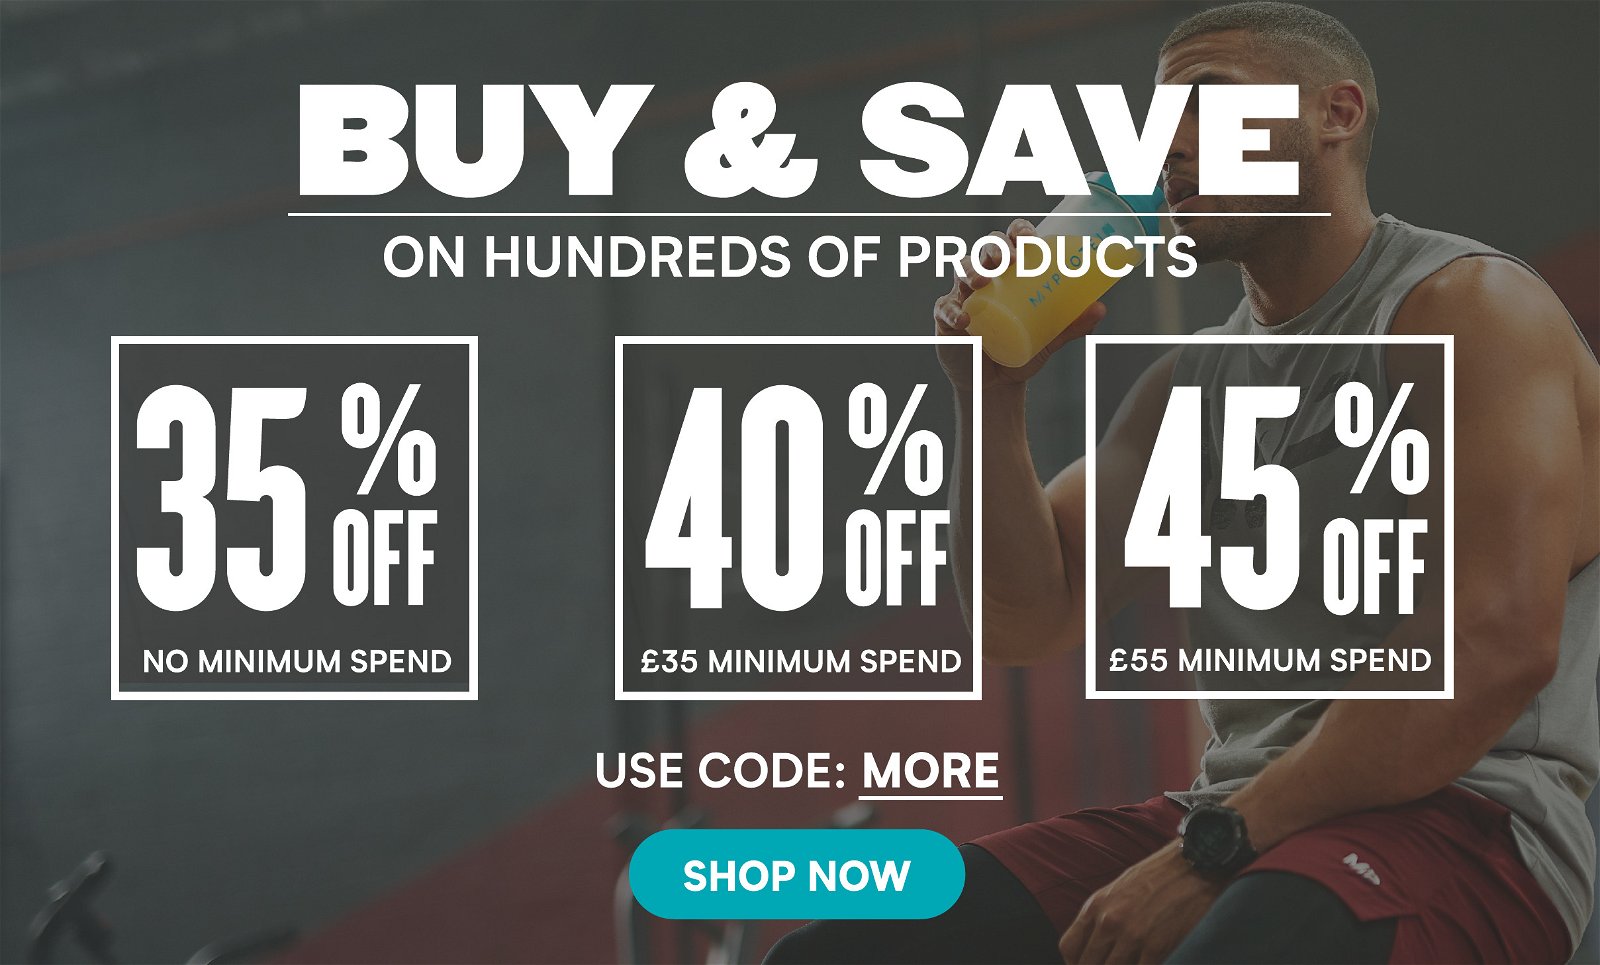 Buy & Save on hundreds of products